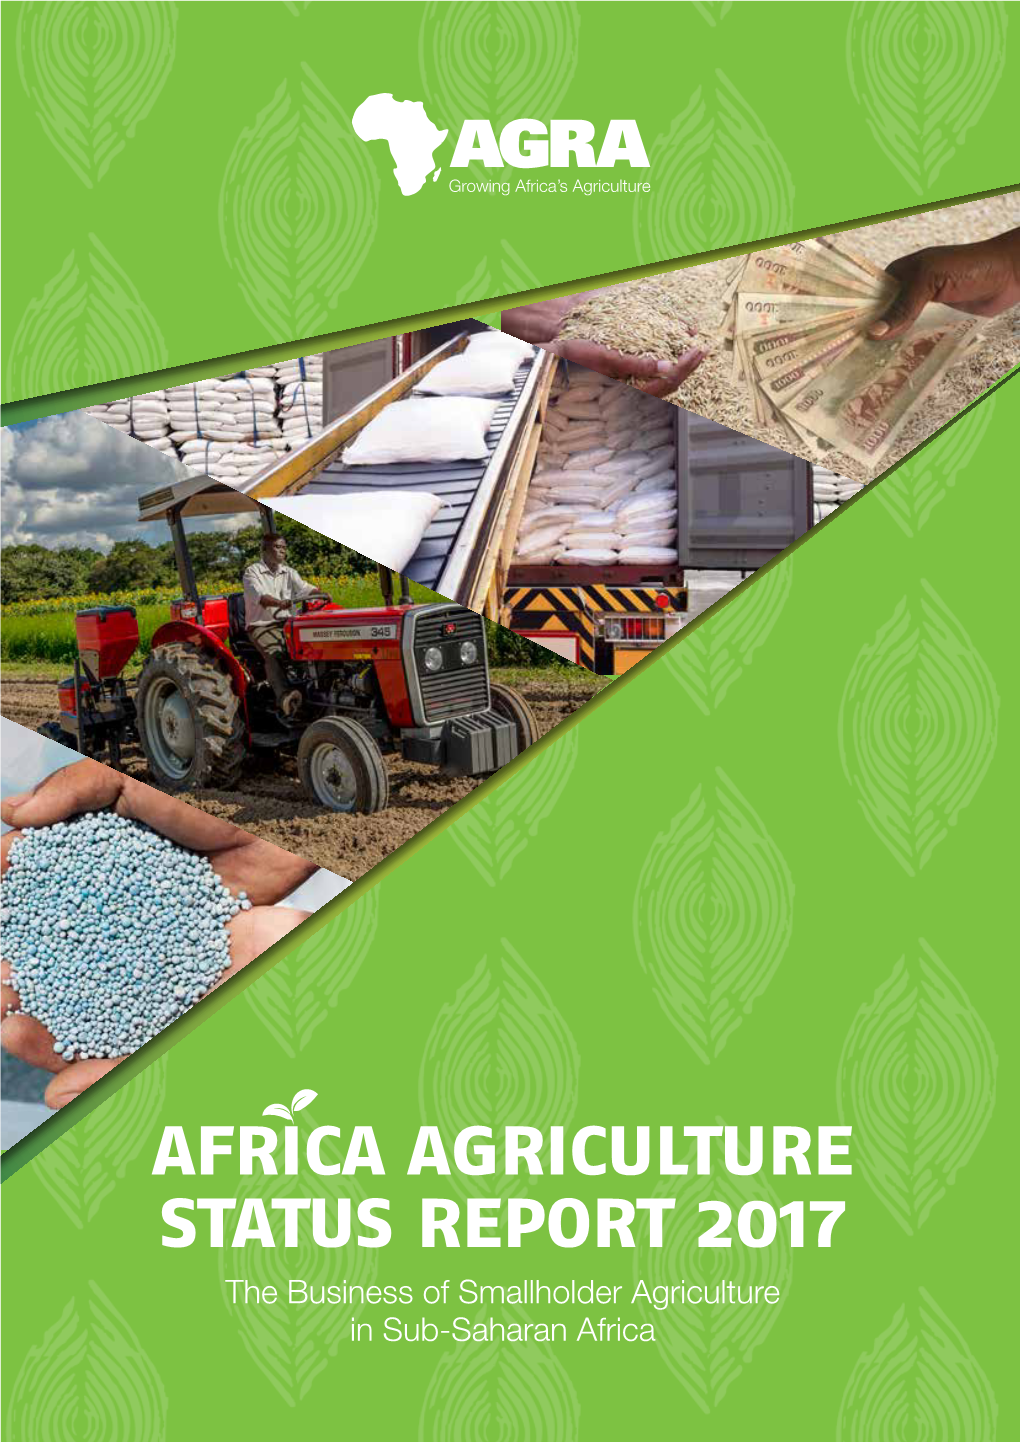 AFRICA AGRICULTURE STATUS REPORT 2017 the Business of Smallholder Agriculture in Sub-Saharan Africa